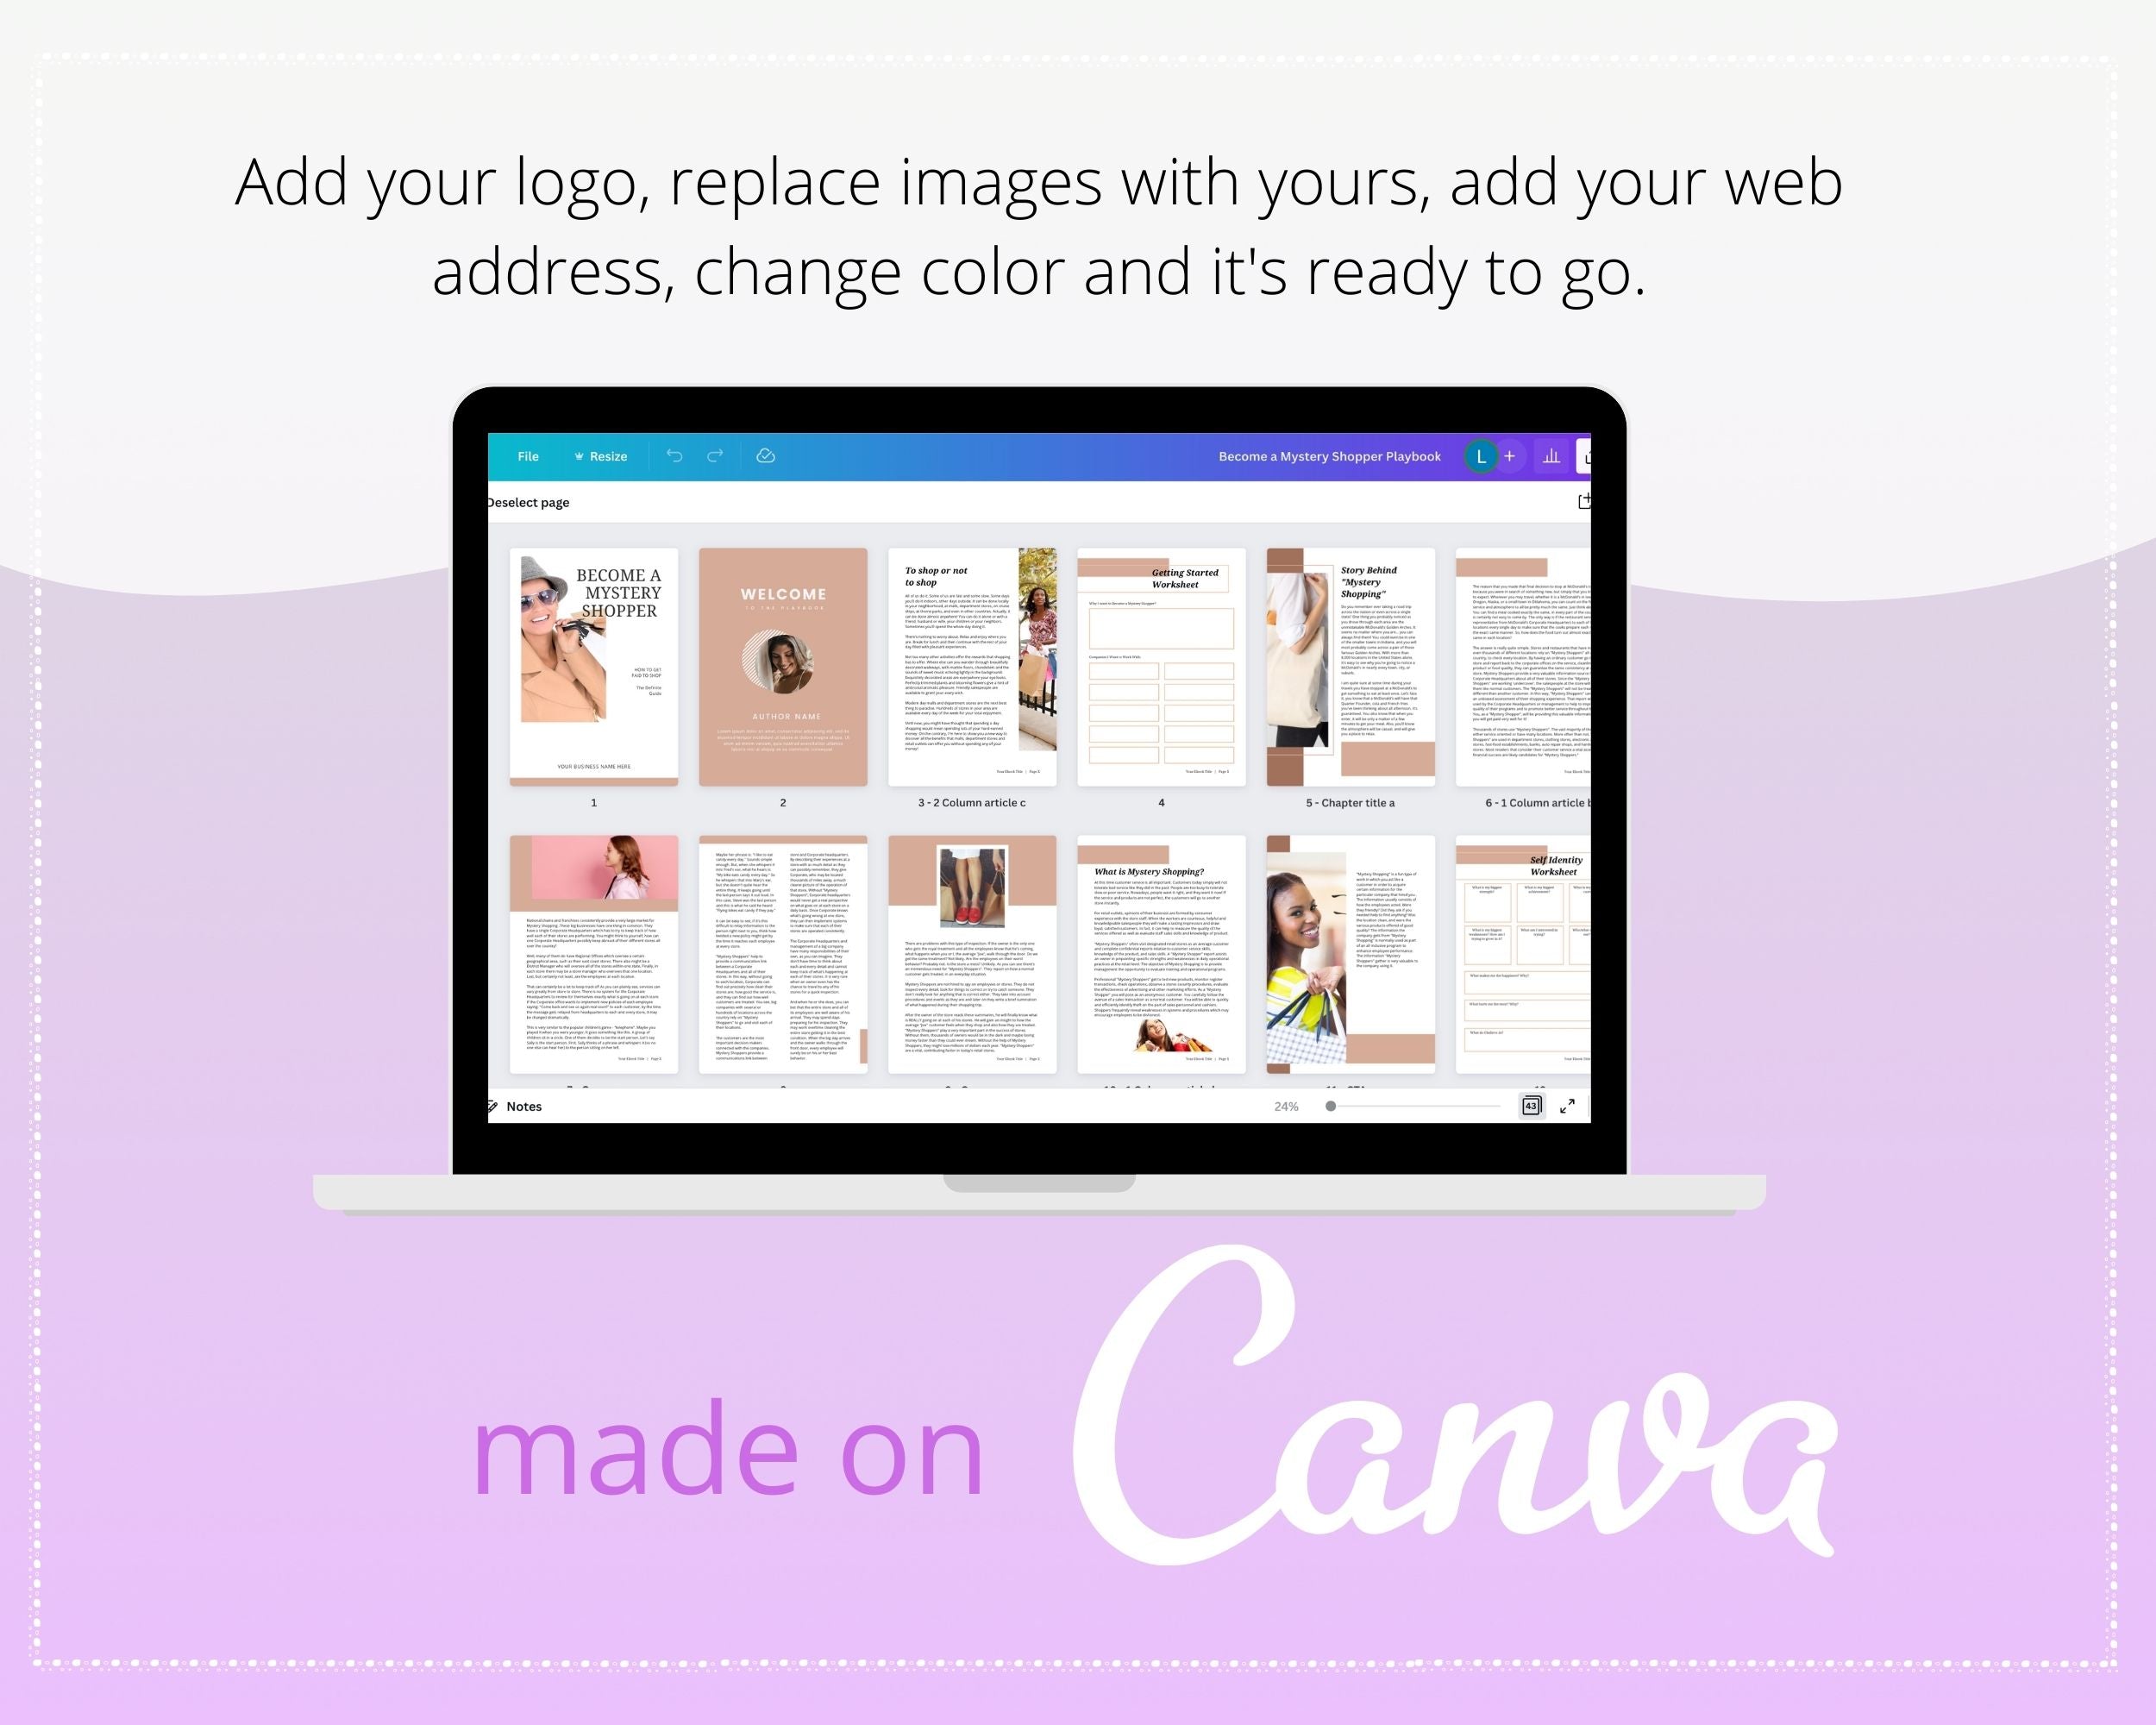 Become a Mystery Shopper Playbook in Canva